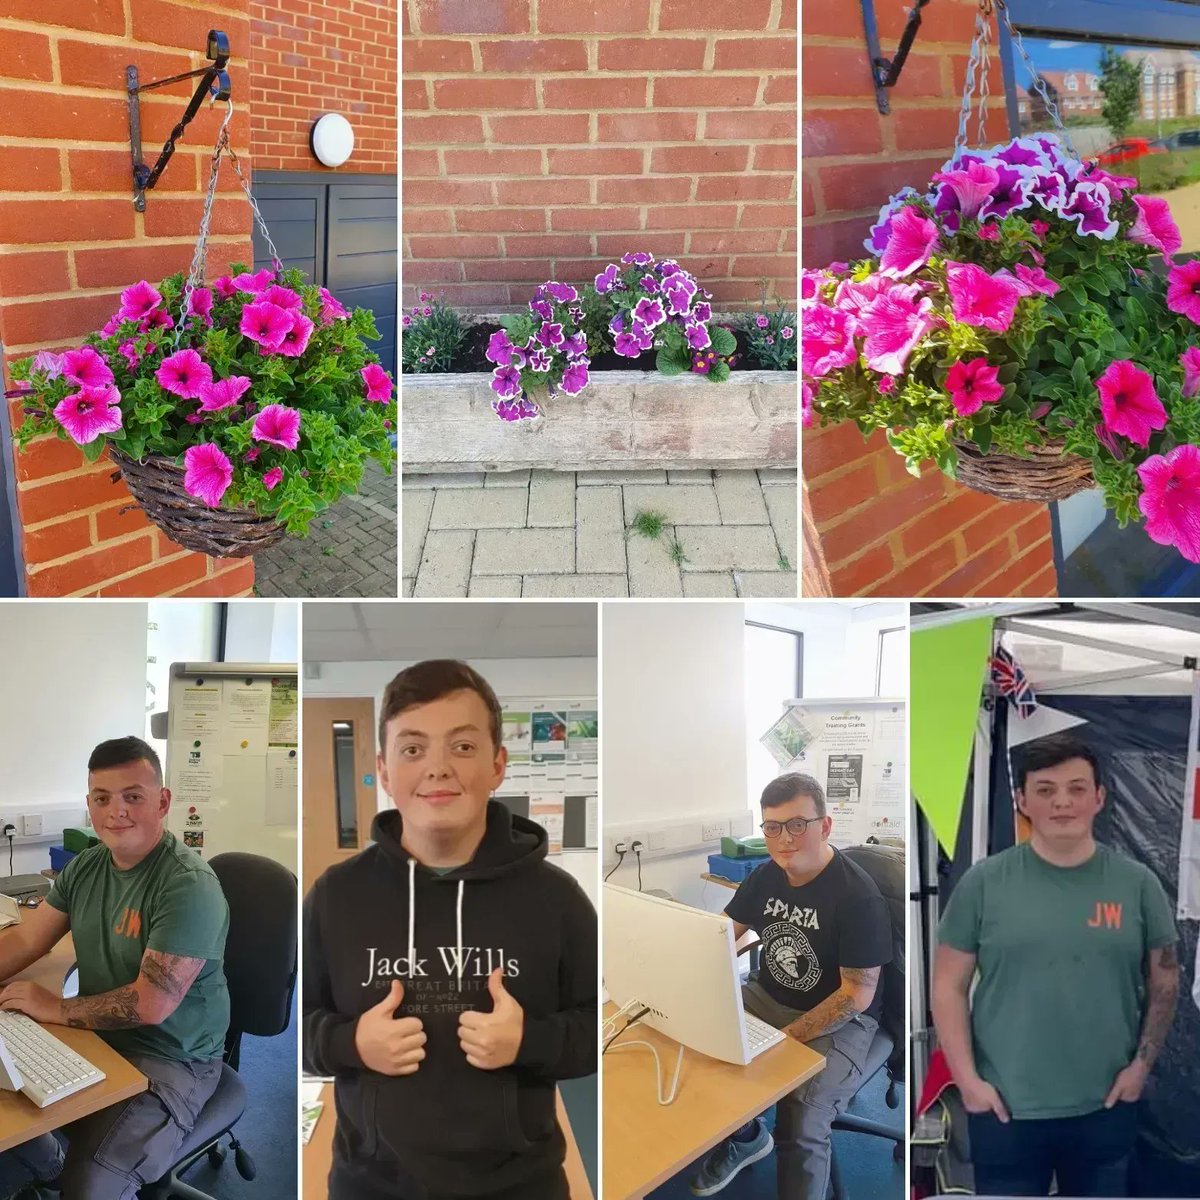 For #VolunteersWeek we wanted to say a HUGE thank you to our resident volunteers; Stuart who has been planting beautiful flowers, and Josh, our official #veterans volunteer, who has been working with the team on our socials + helping Kenny out! 😀 #WeAreEntrain @VolunteersWeek